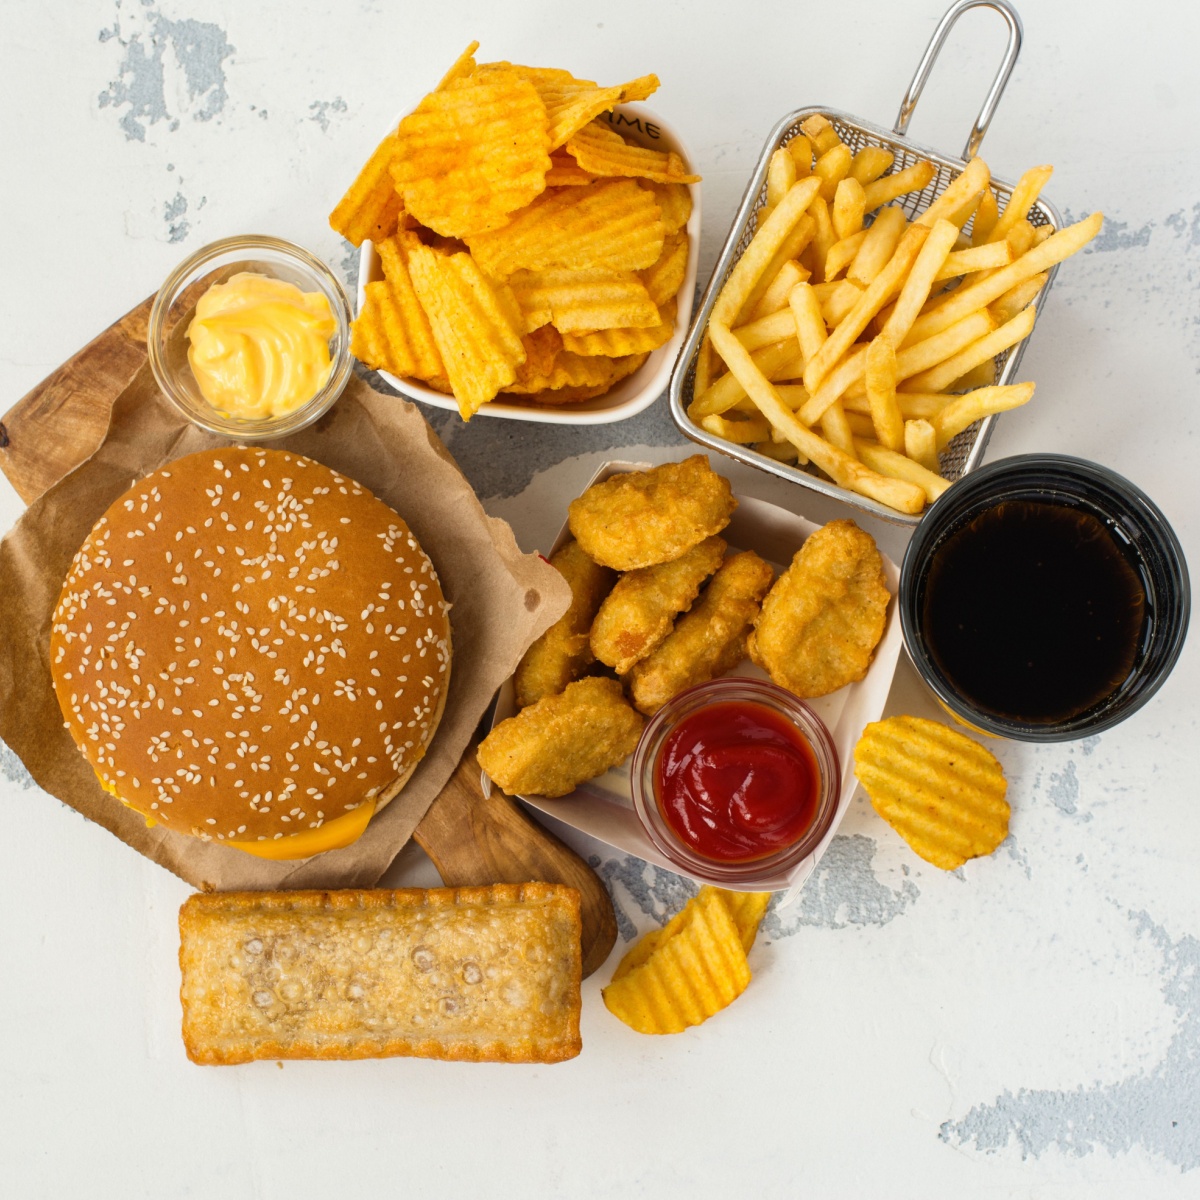 processed fast foods with trans fats